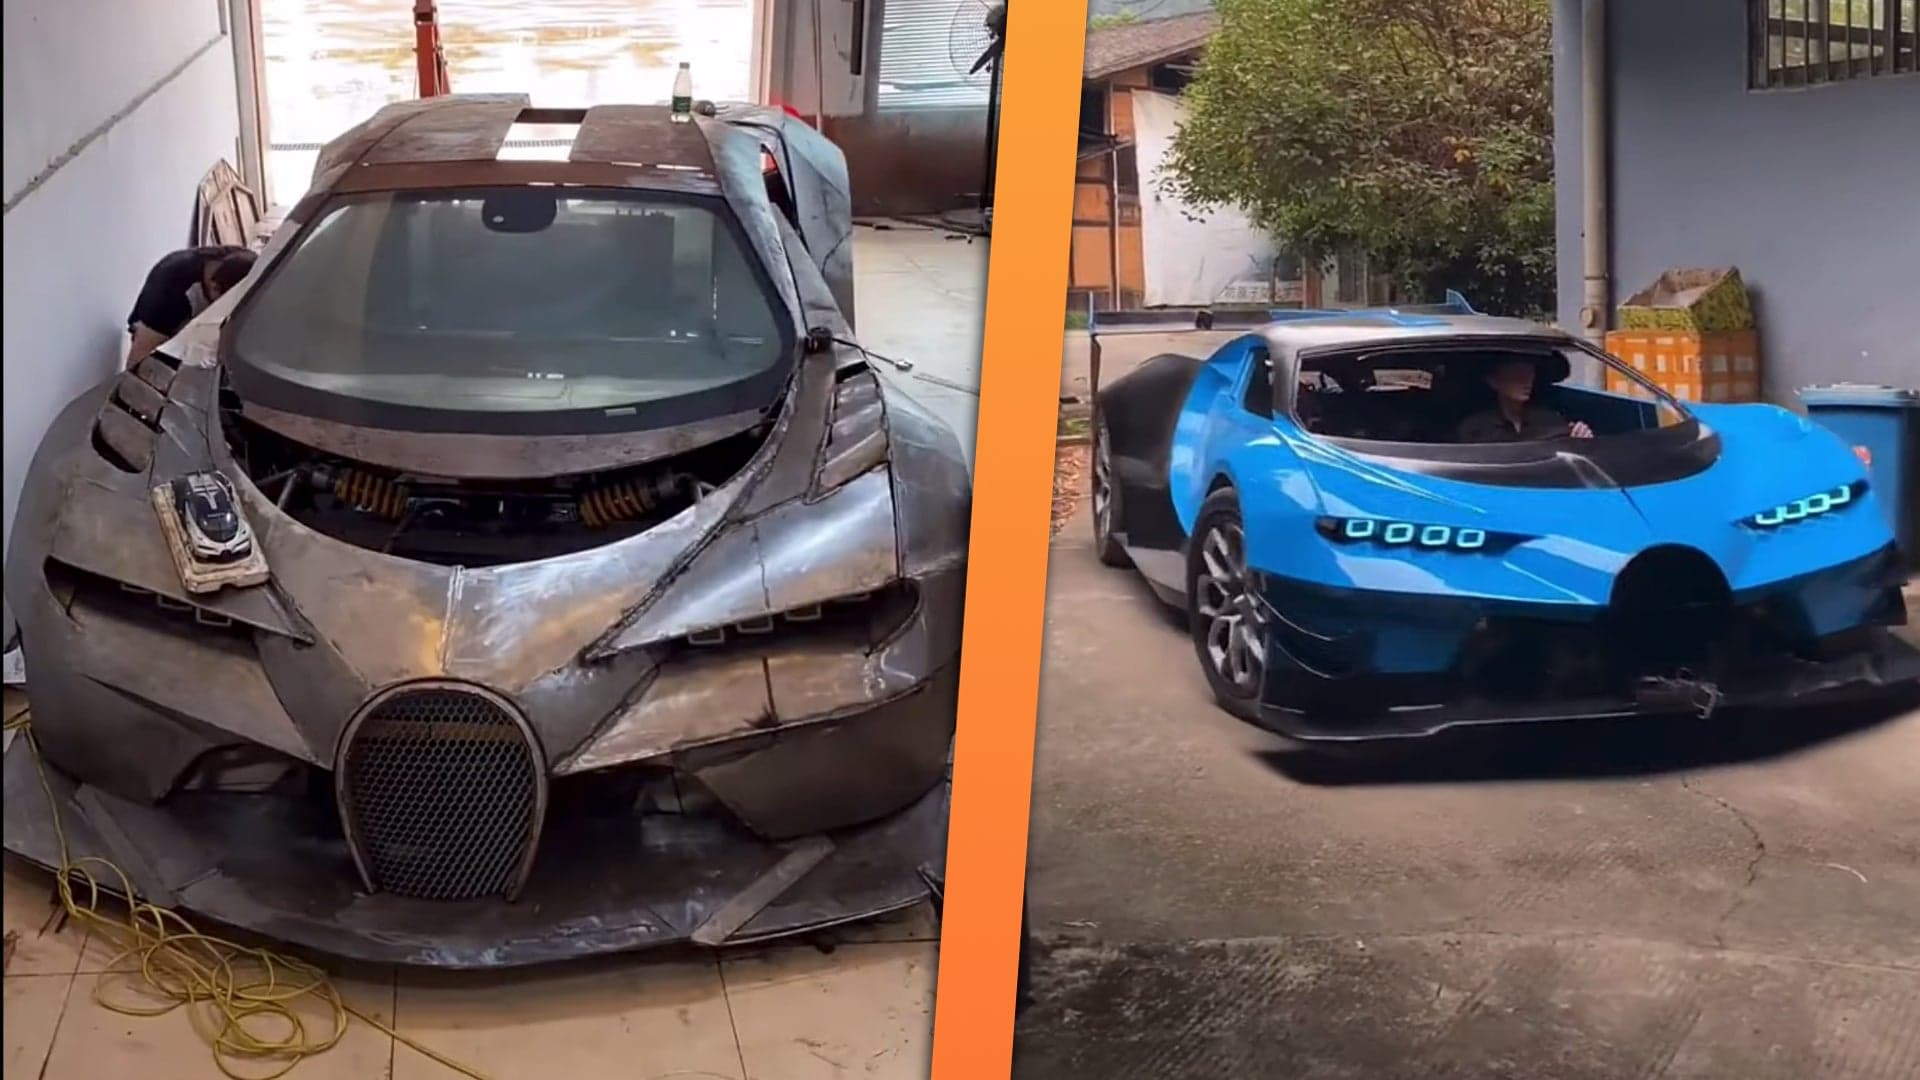 Bugatti Vision Gran Turismo Replica Built by Chinese Mechanic Is Fully Drivable